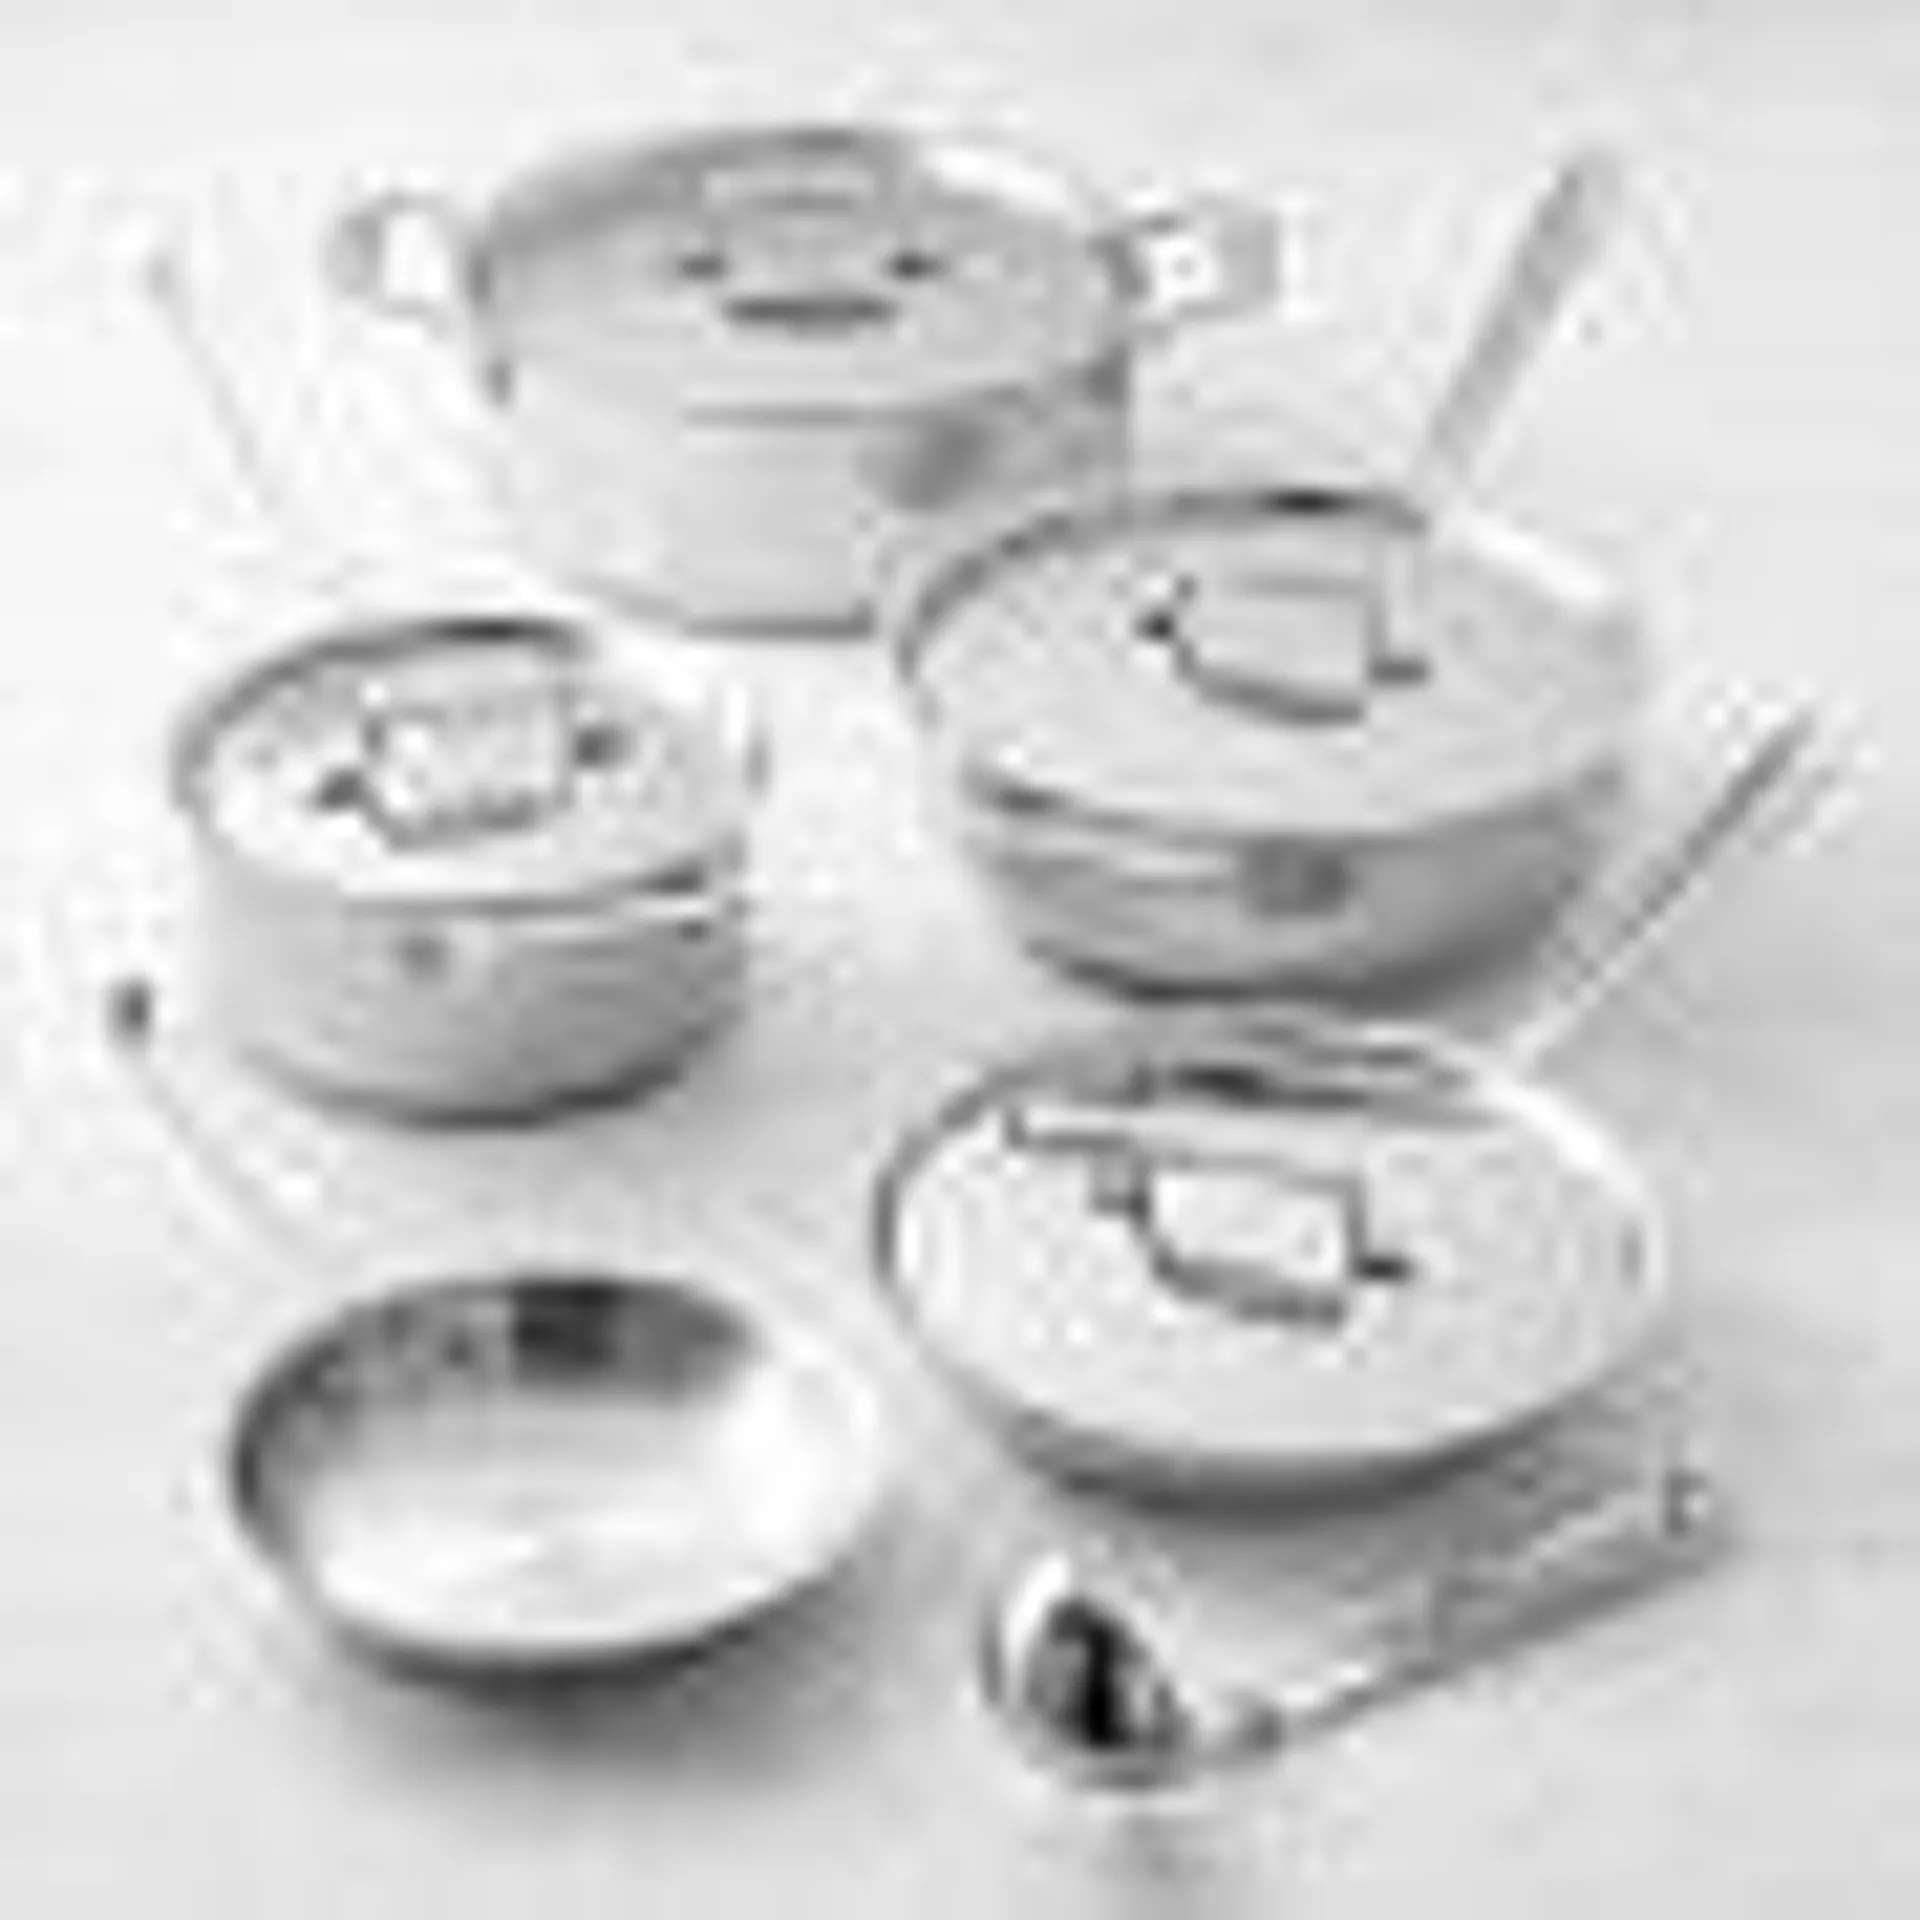 All-Clad D5® Stainless-Steel 10-Piece Essential Cookware Set